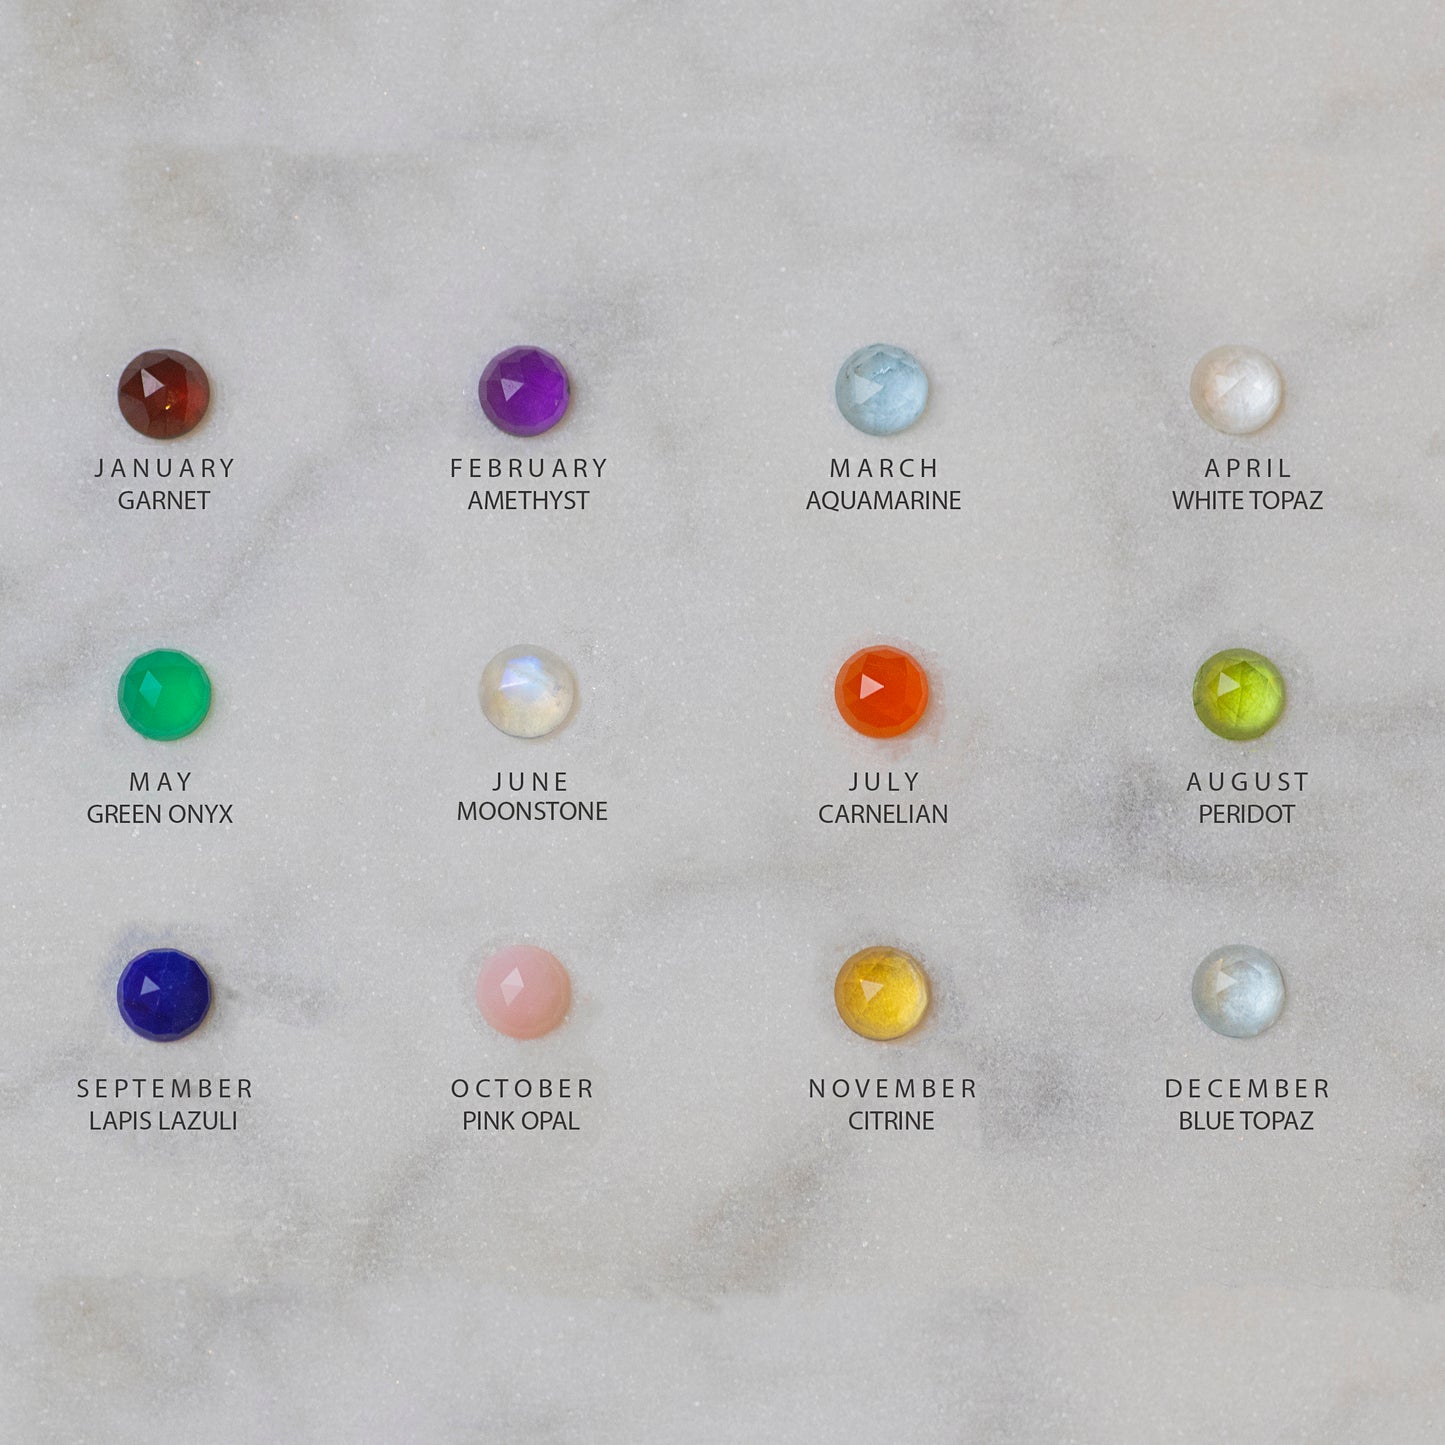 90th Birthday Birthstone Earrings - The Original 9 Links for 9 Decades - Petite Silver & Gold